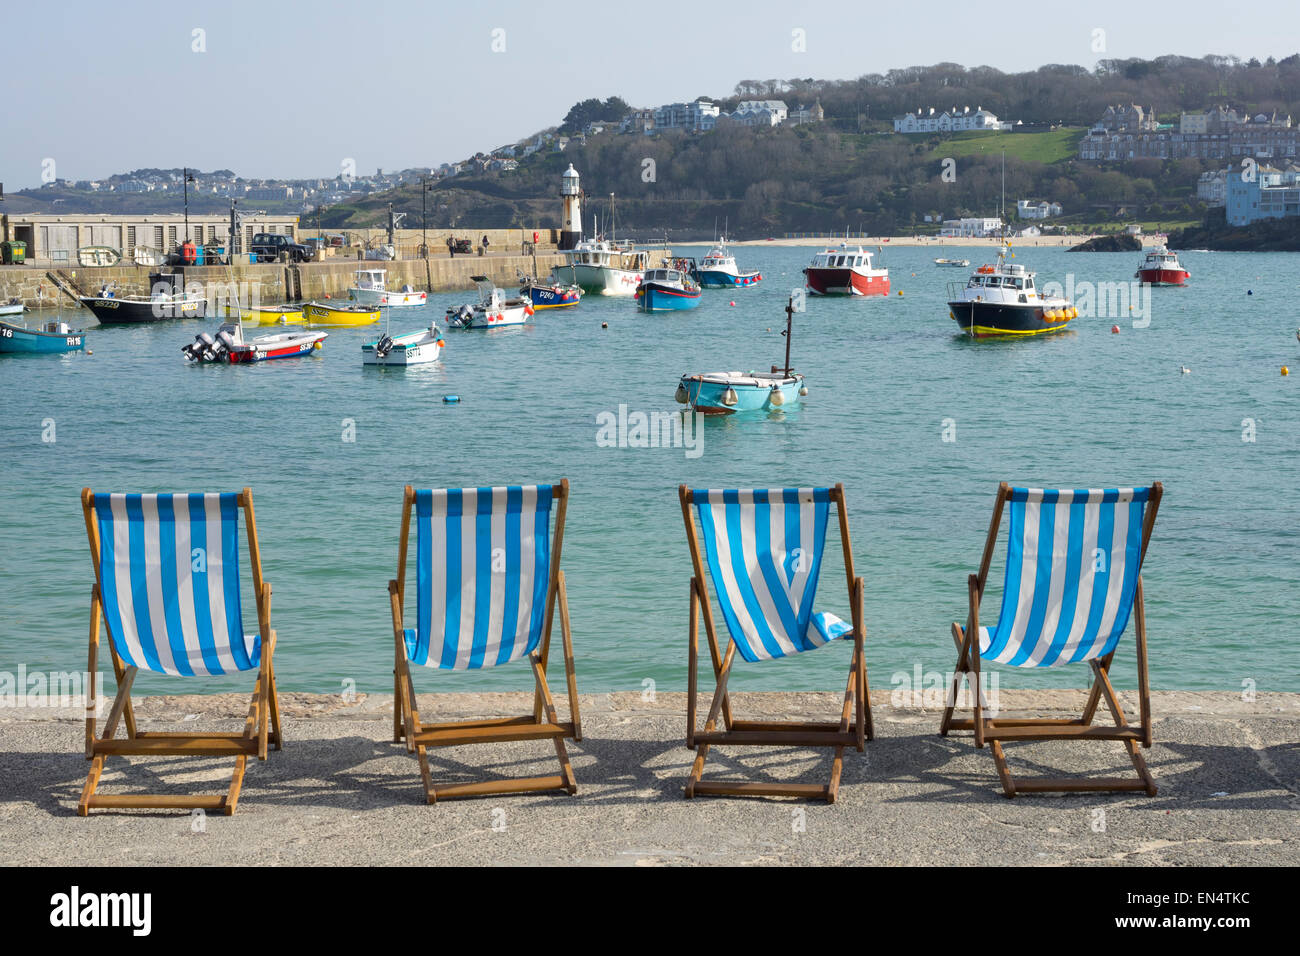 Deckchairs on the harbour sea front in St. Ives, Cornwall England. Stock Photo